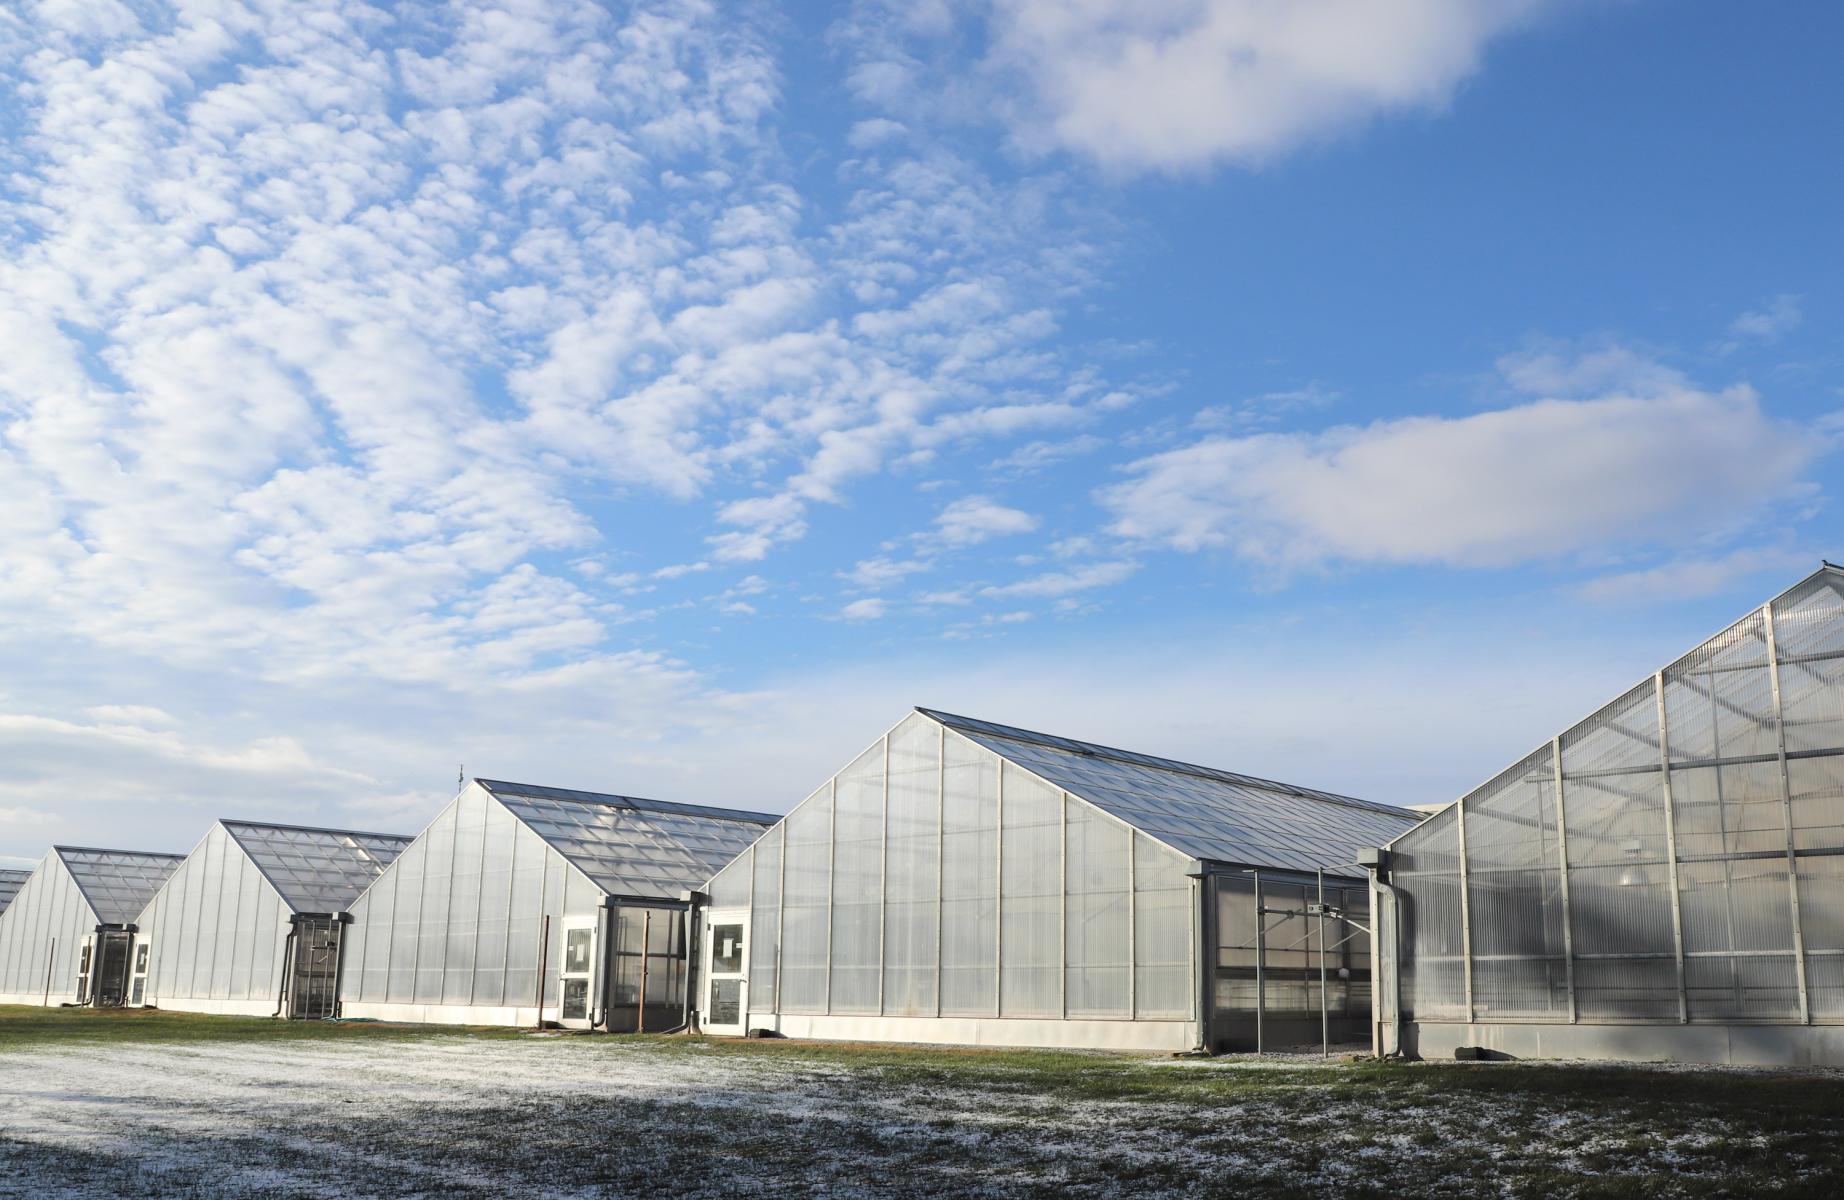 Sunny skies belie the cold temperatures on East Campus. Greenhouses keep both plants and researchers warm for ongoing research all year.